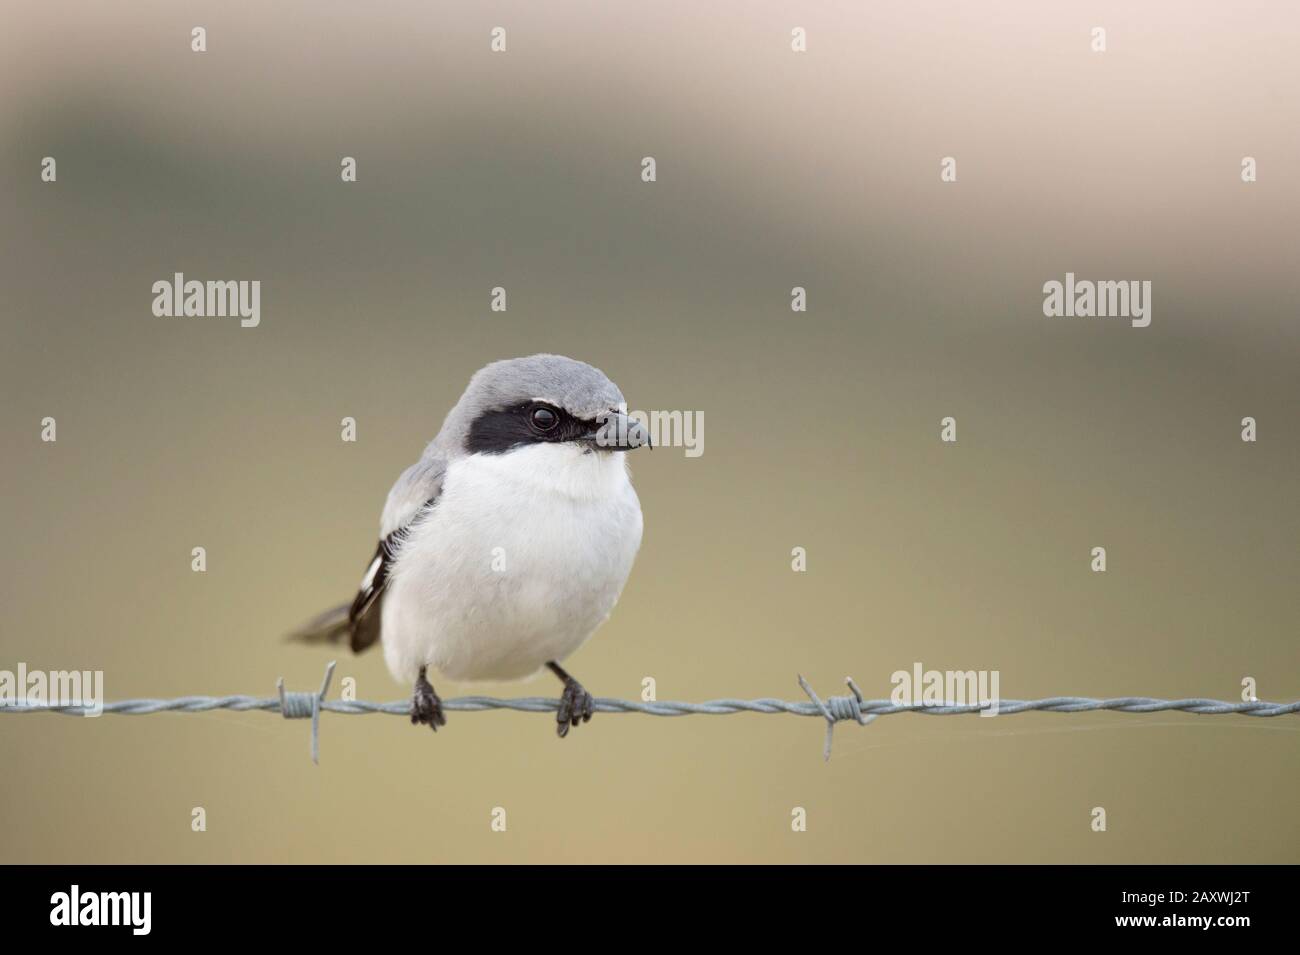 A close-up Loggerhead Shrike perched on barbed wire in front of a smooth out of focus green background. Stock Photo